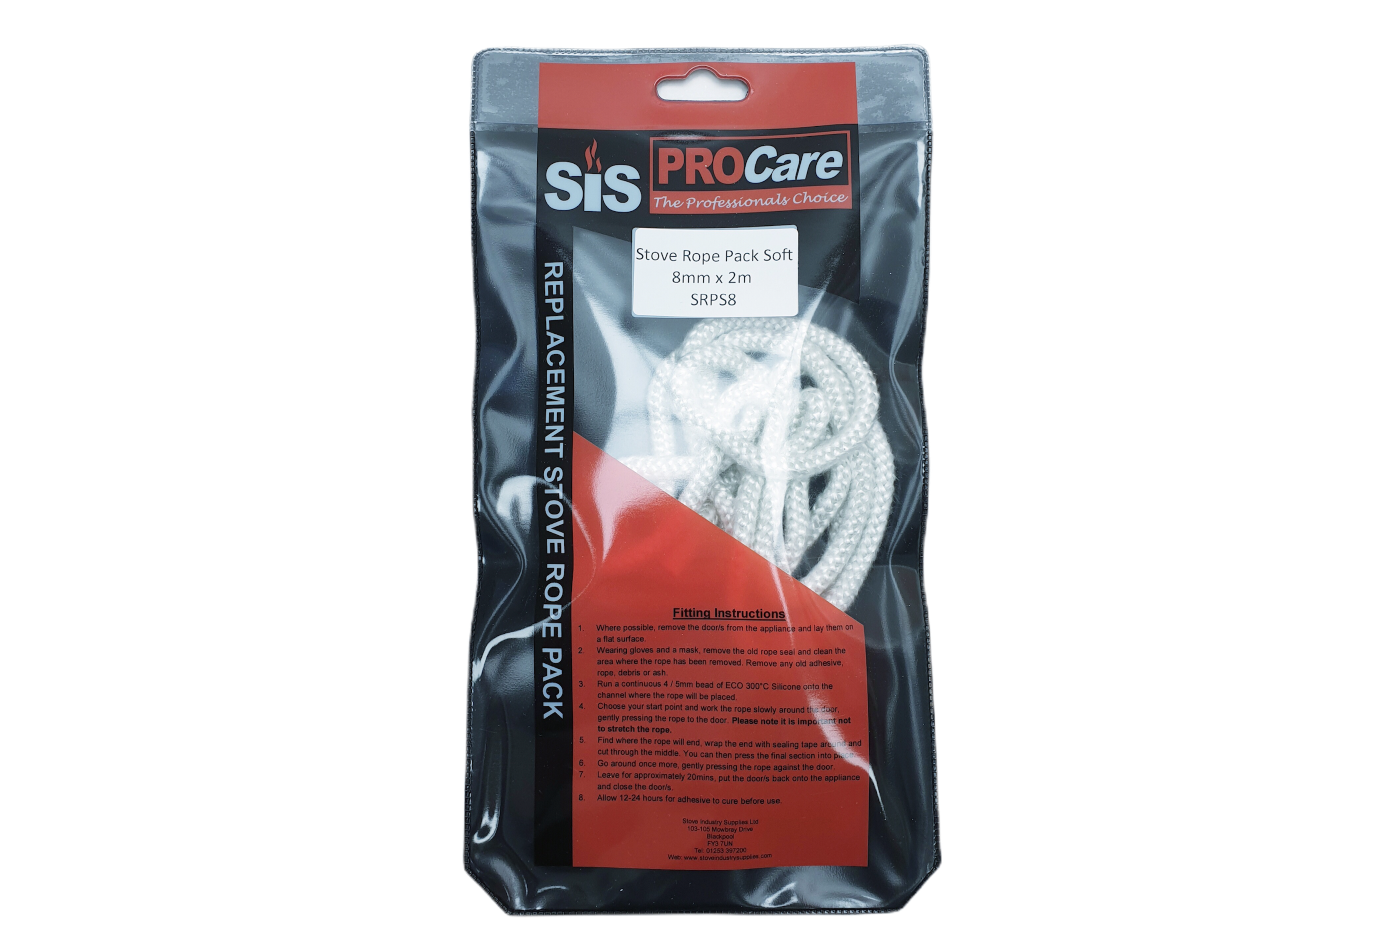 SiS Procare White 8 milimetre x 2 metre Soft Stove Rope Pack - product code SRPS8